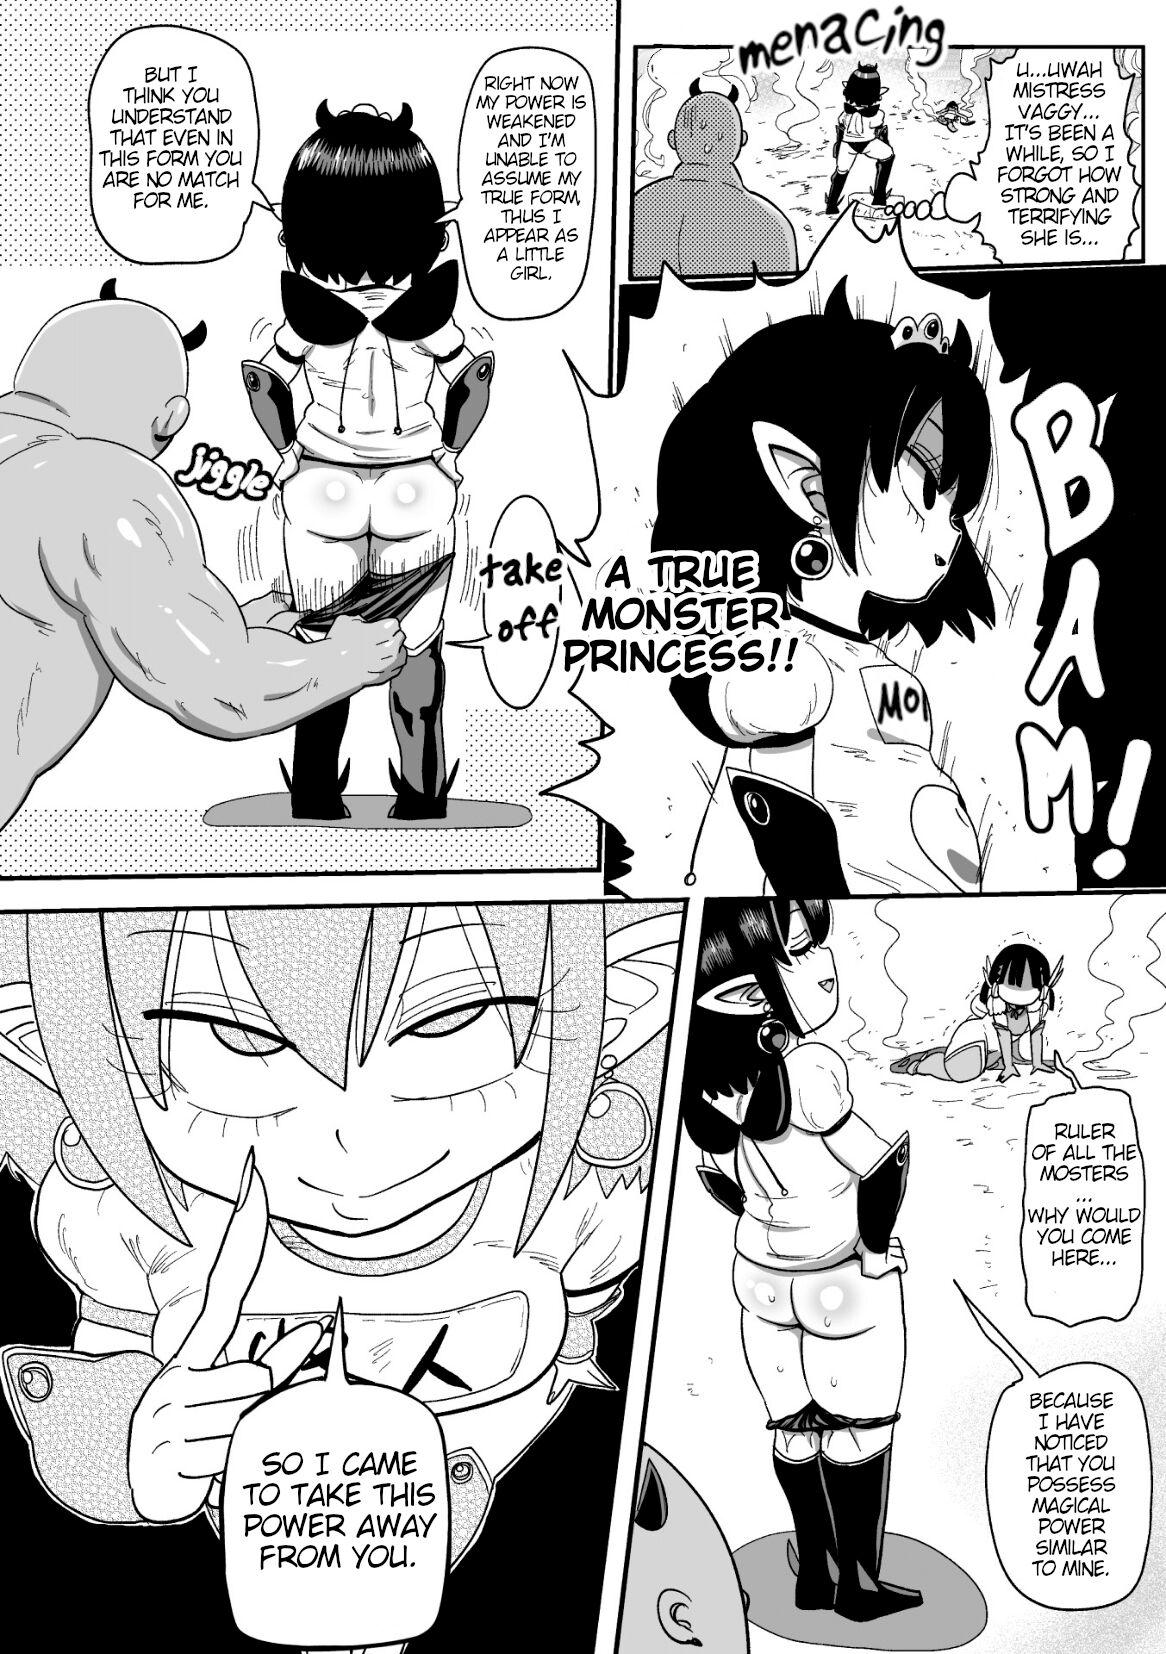 Thick Magical Girl In Training - Ana Ch. 3 | Yousei no Mahou Shoujo Anna Ch. 3 - Original Strap On - Page 6